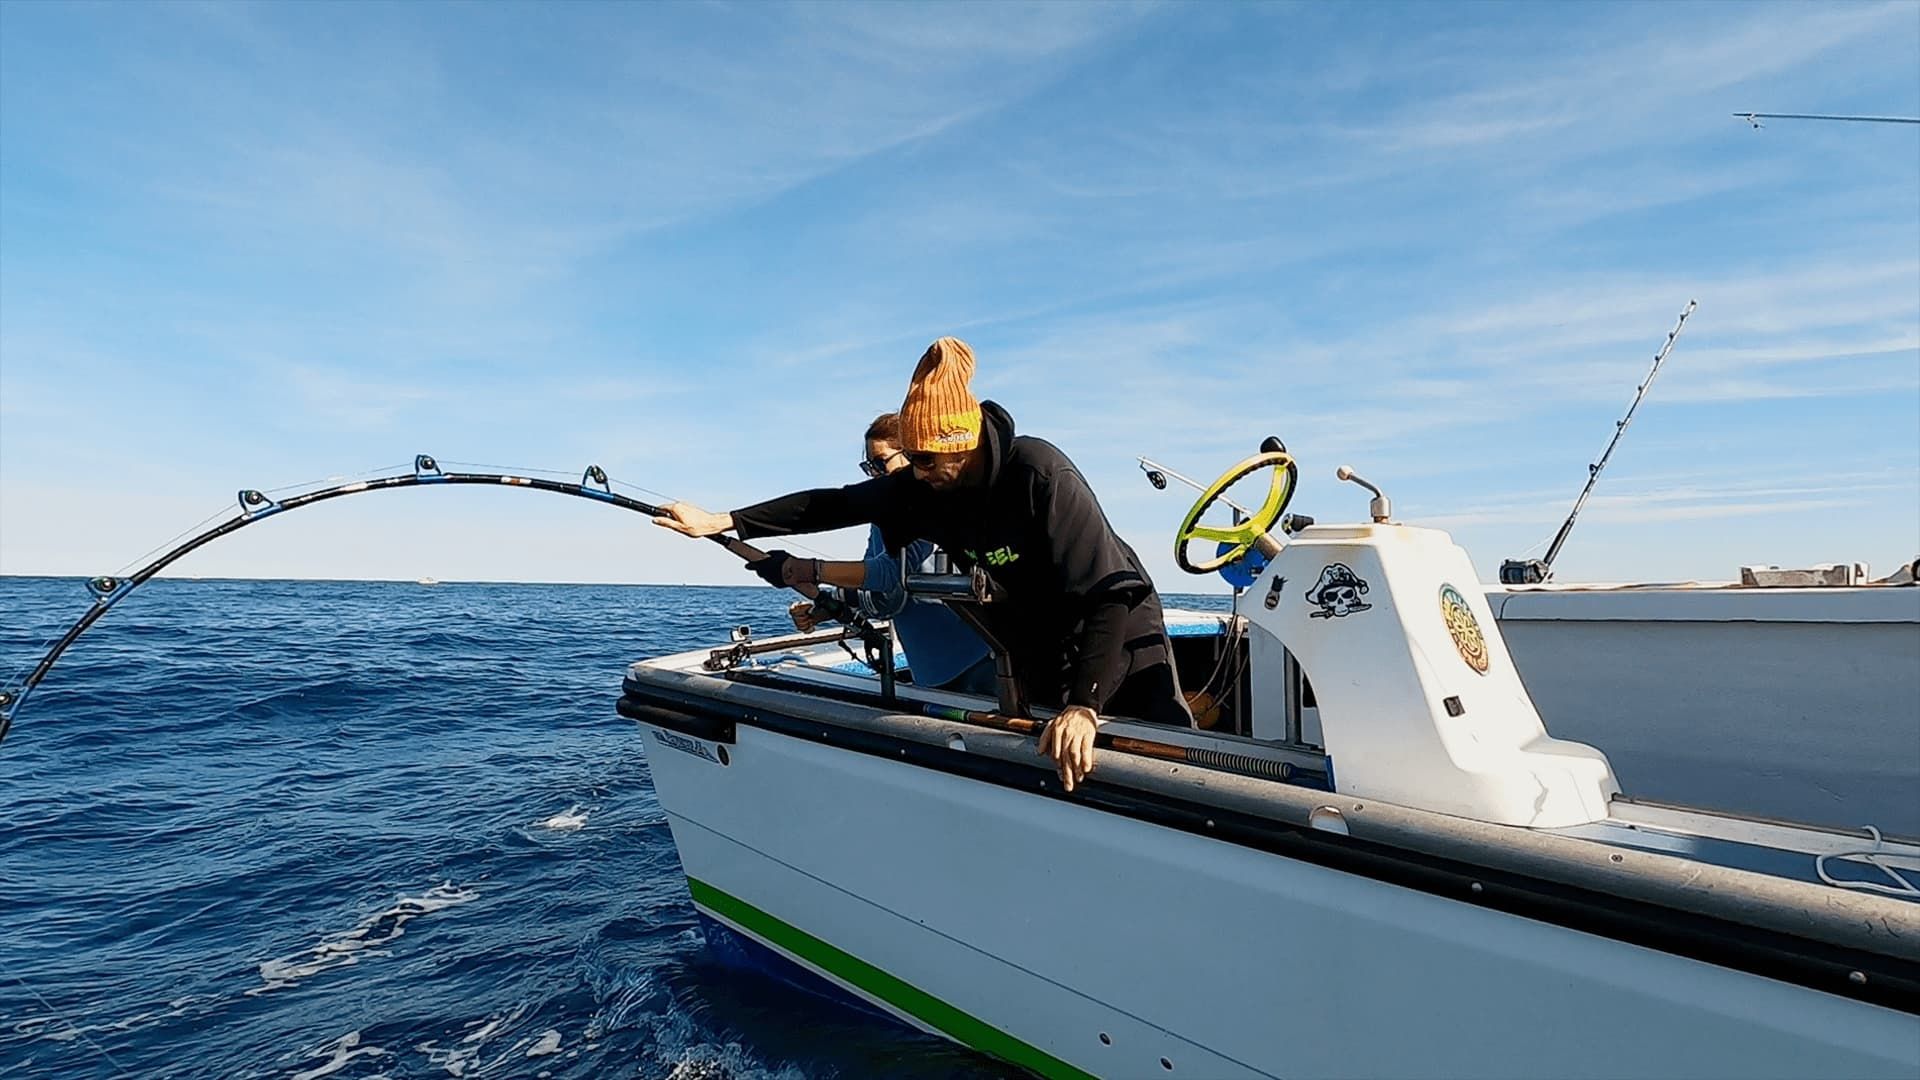 Wicked Tuna: Outer Banks Showdown background